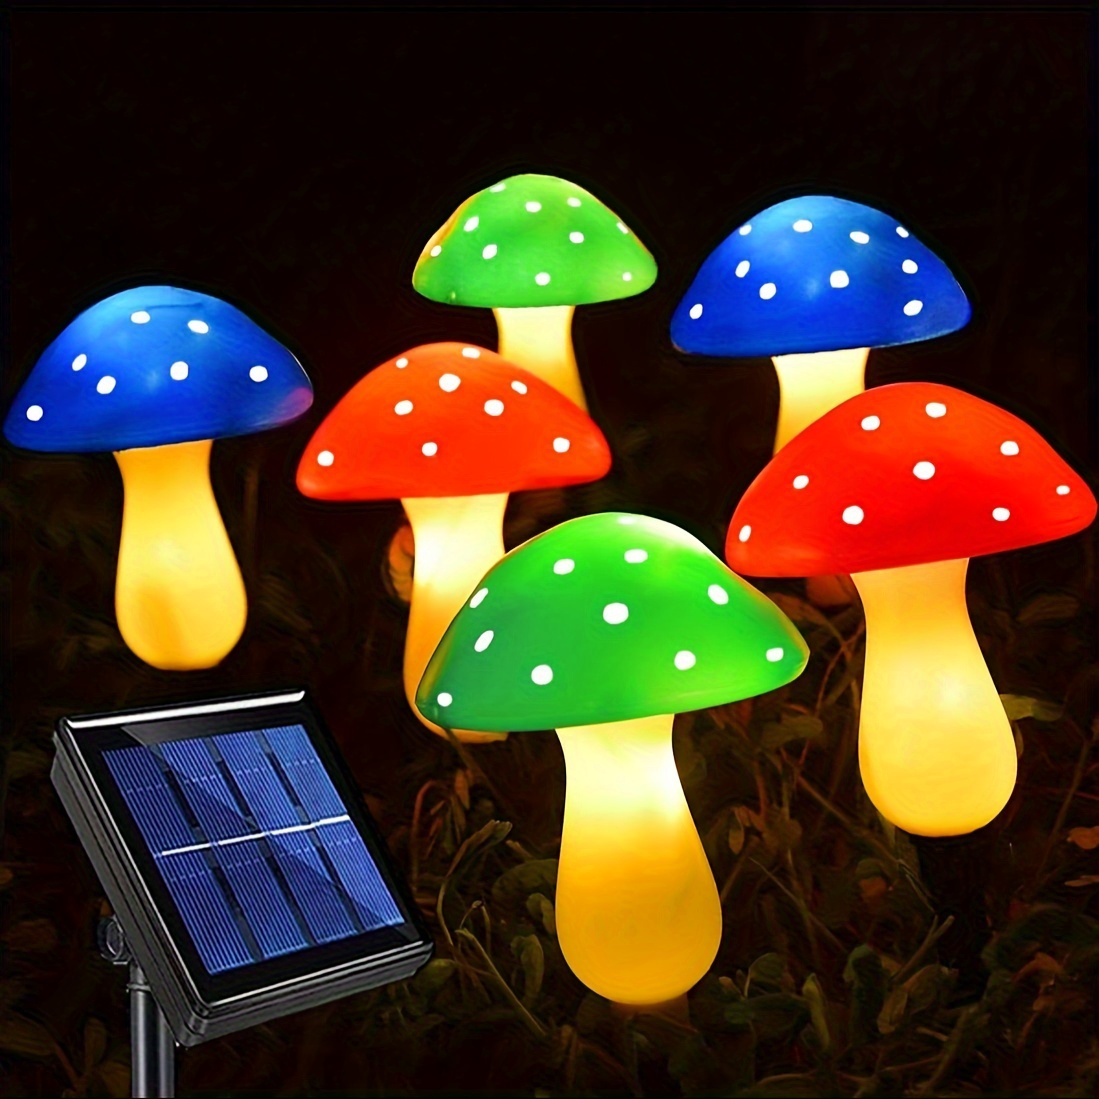 

festive" 6-pack Solar Mushroom Garden Lights With 8 Lighting Modes - Perfect For Outdoor Yard, Christmas & Holiday Decor | Charming Nighttime Ambiance For Camping, Backyard & Pathways